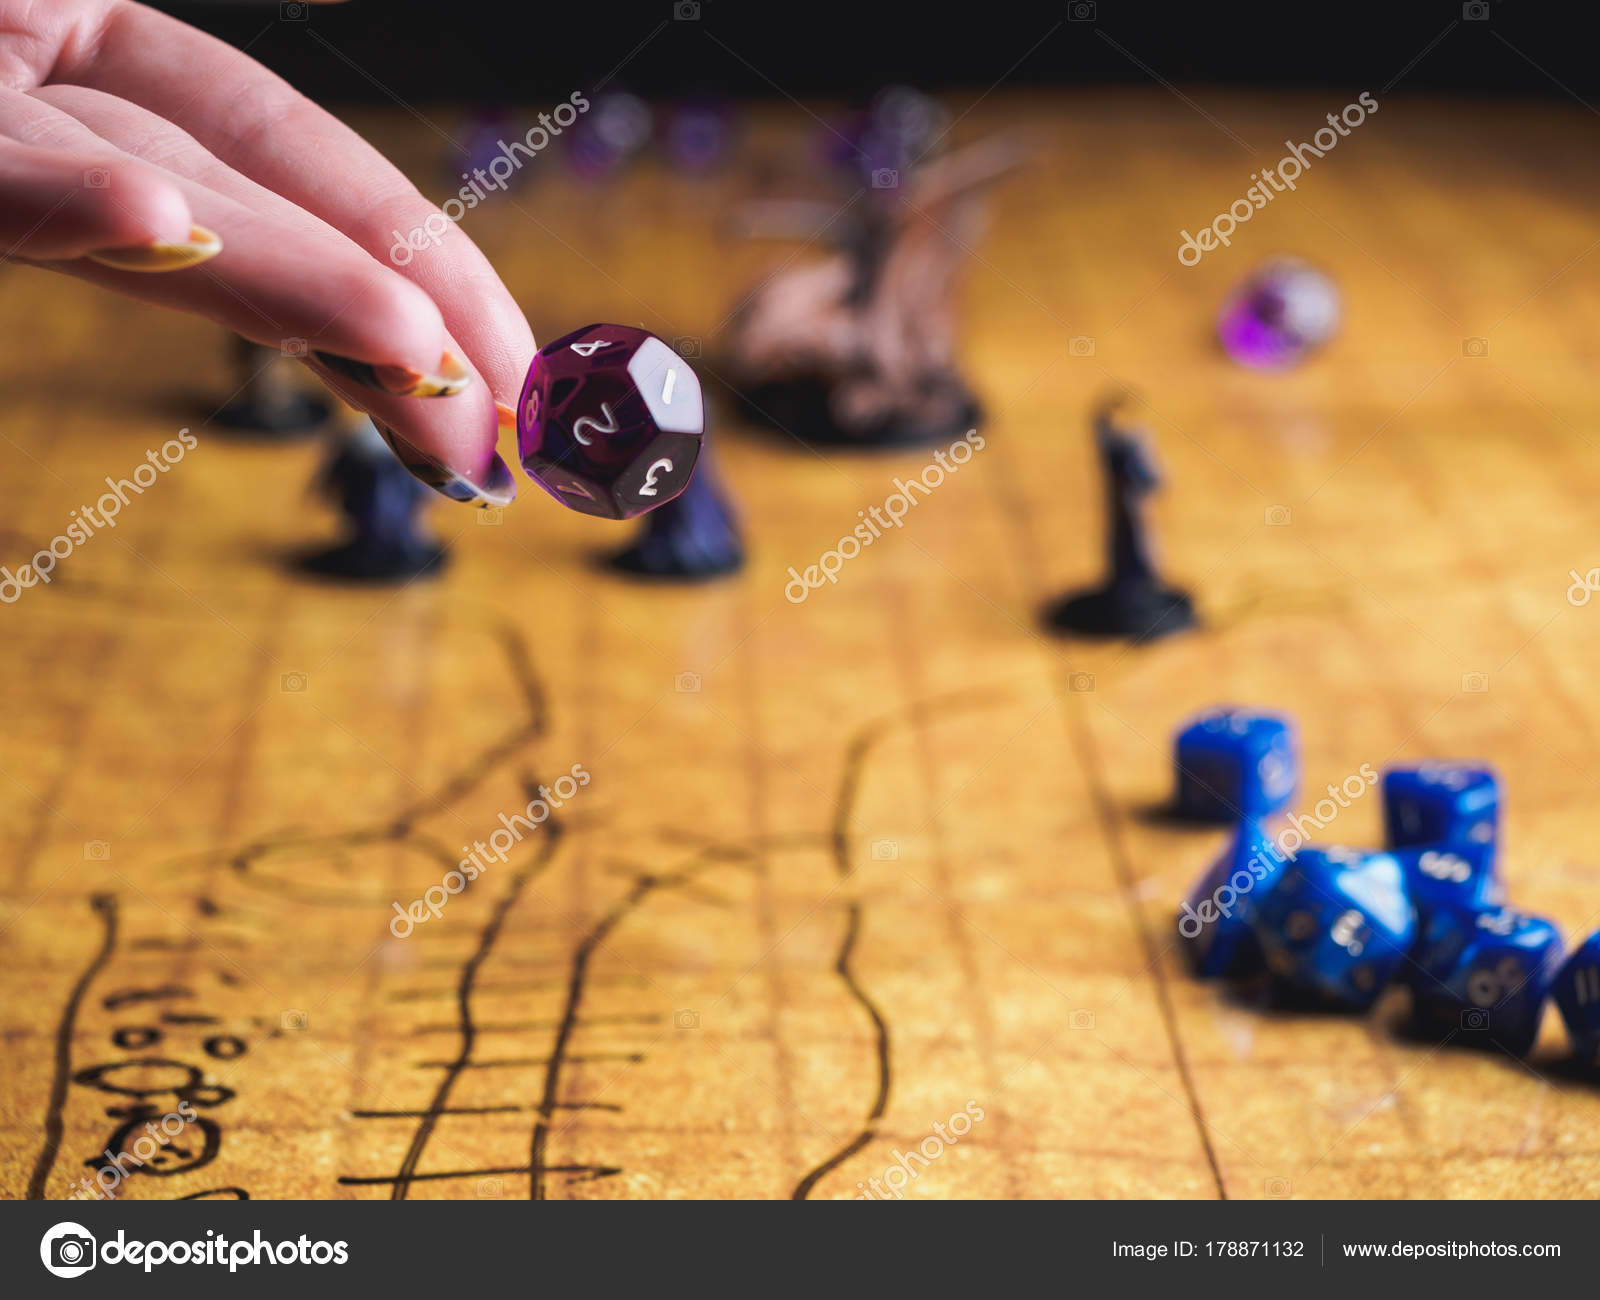 Roleplay Game With Dragons In Dungeon. Yellow Field Dice. Stock Photo,  Picture and Royalty Free Image. Image 92658000.